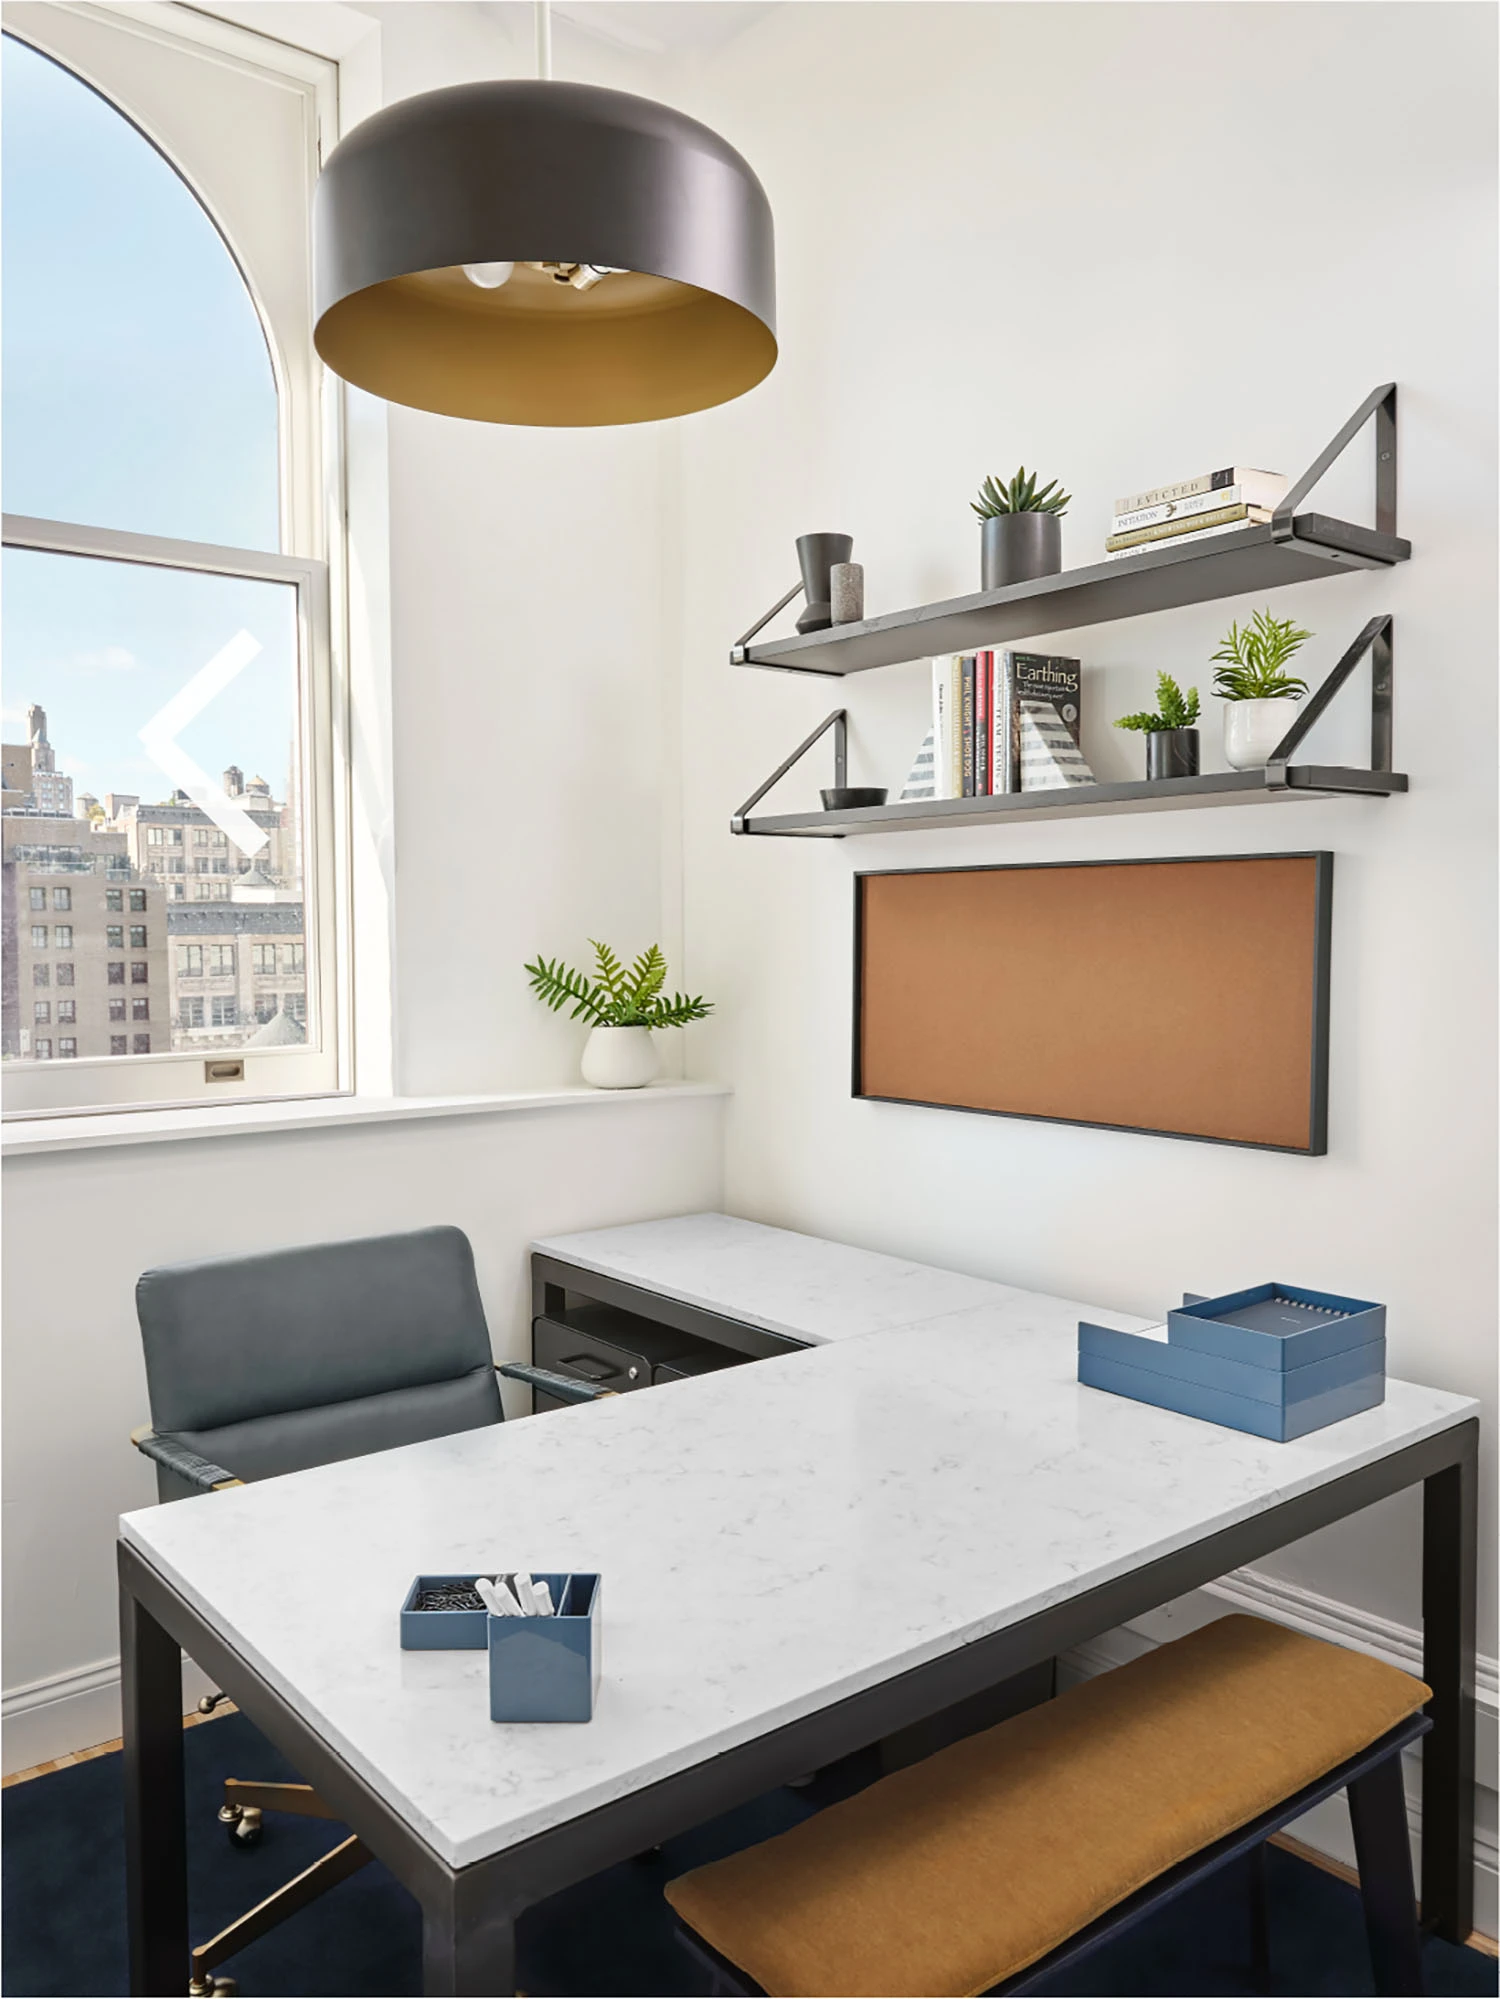 Modern office with desk and shelving